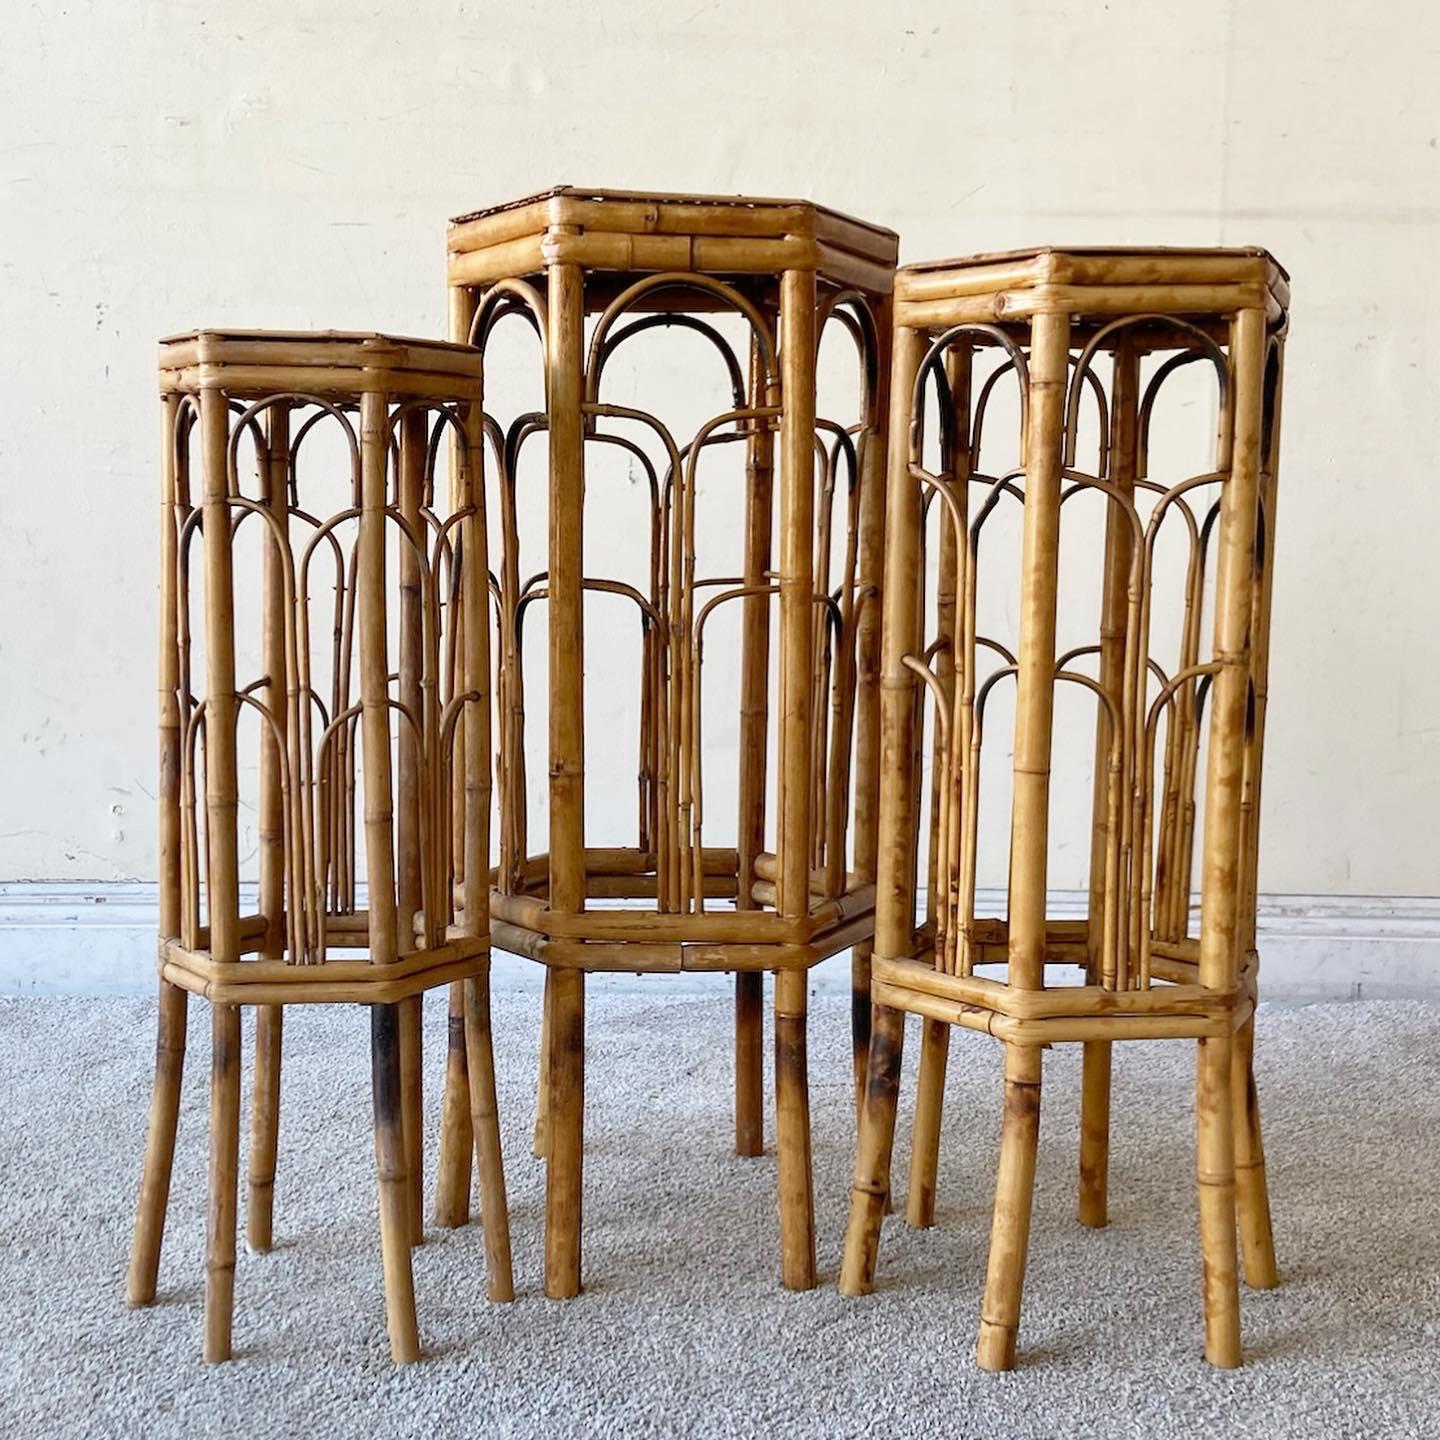 Incredible set of three vintage boho chic nesting tables. Each table is constructed of a tortoise shell bamboo.

Medium measures 11”w, 9.5”D, 28”H
Smallest measures 8.5”W, 7.5”D, 25.5”H.